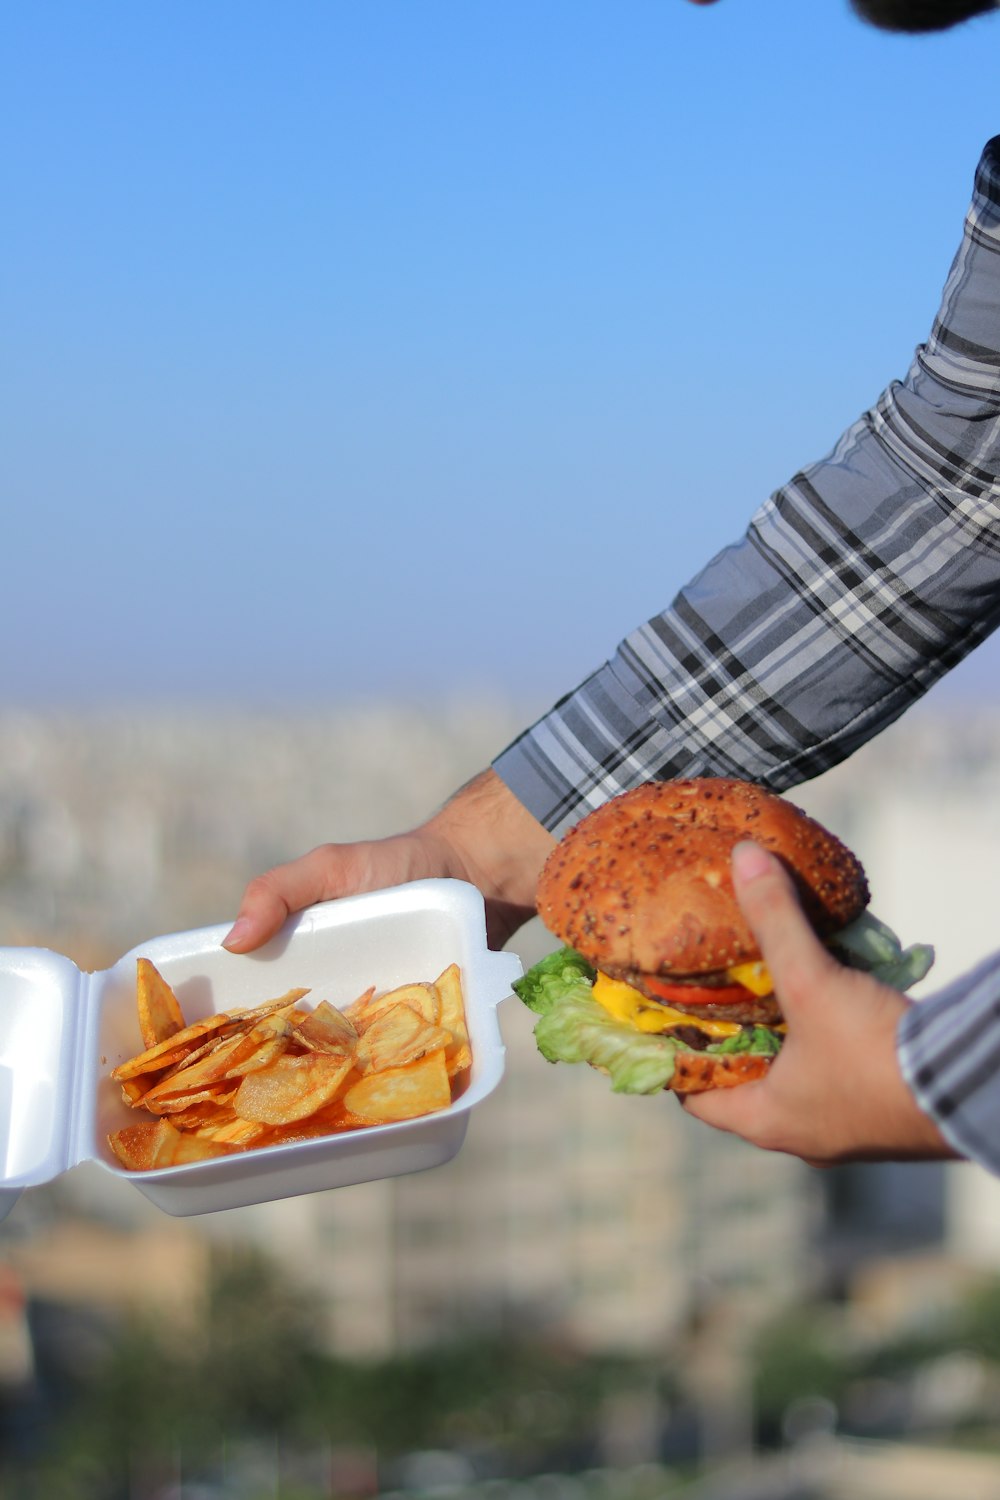 a person holding a container with a hamburger and french fries in it